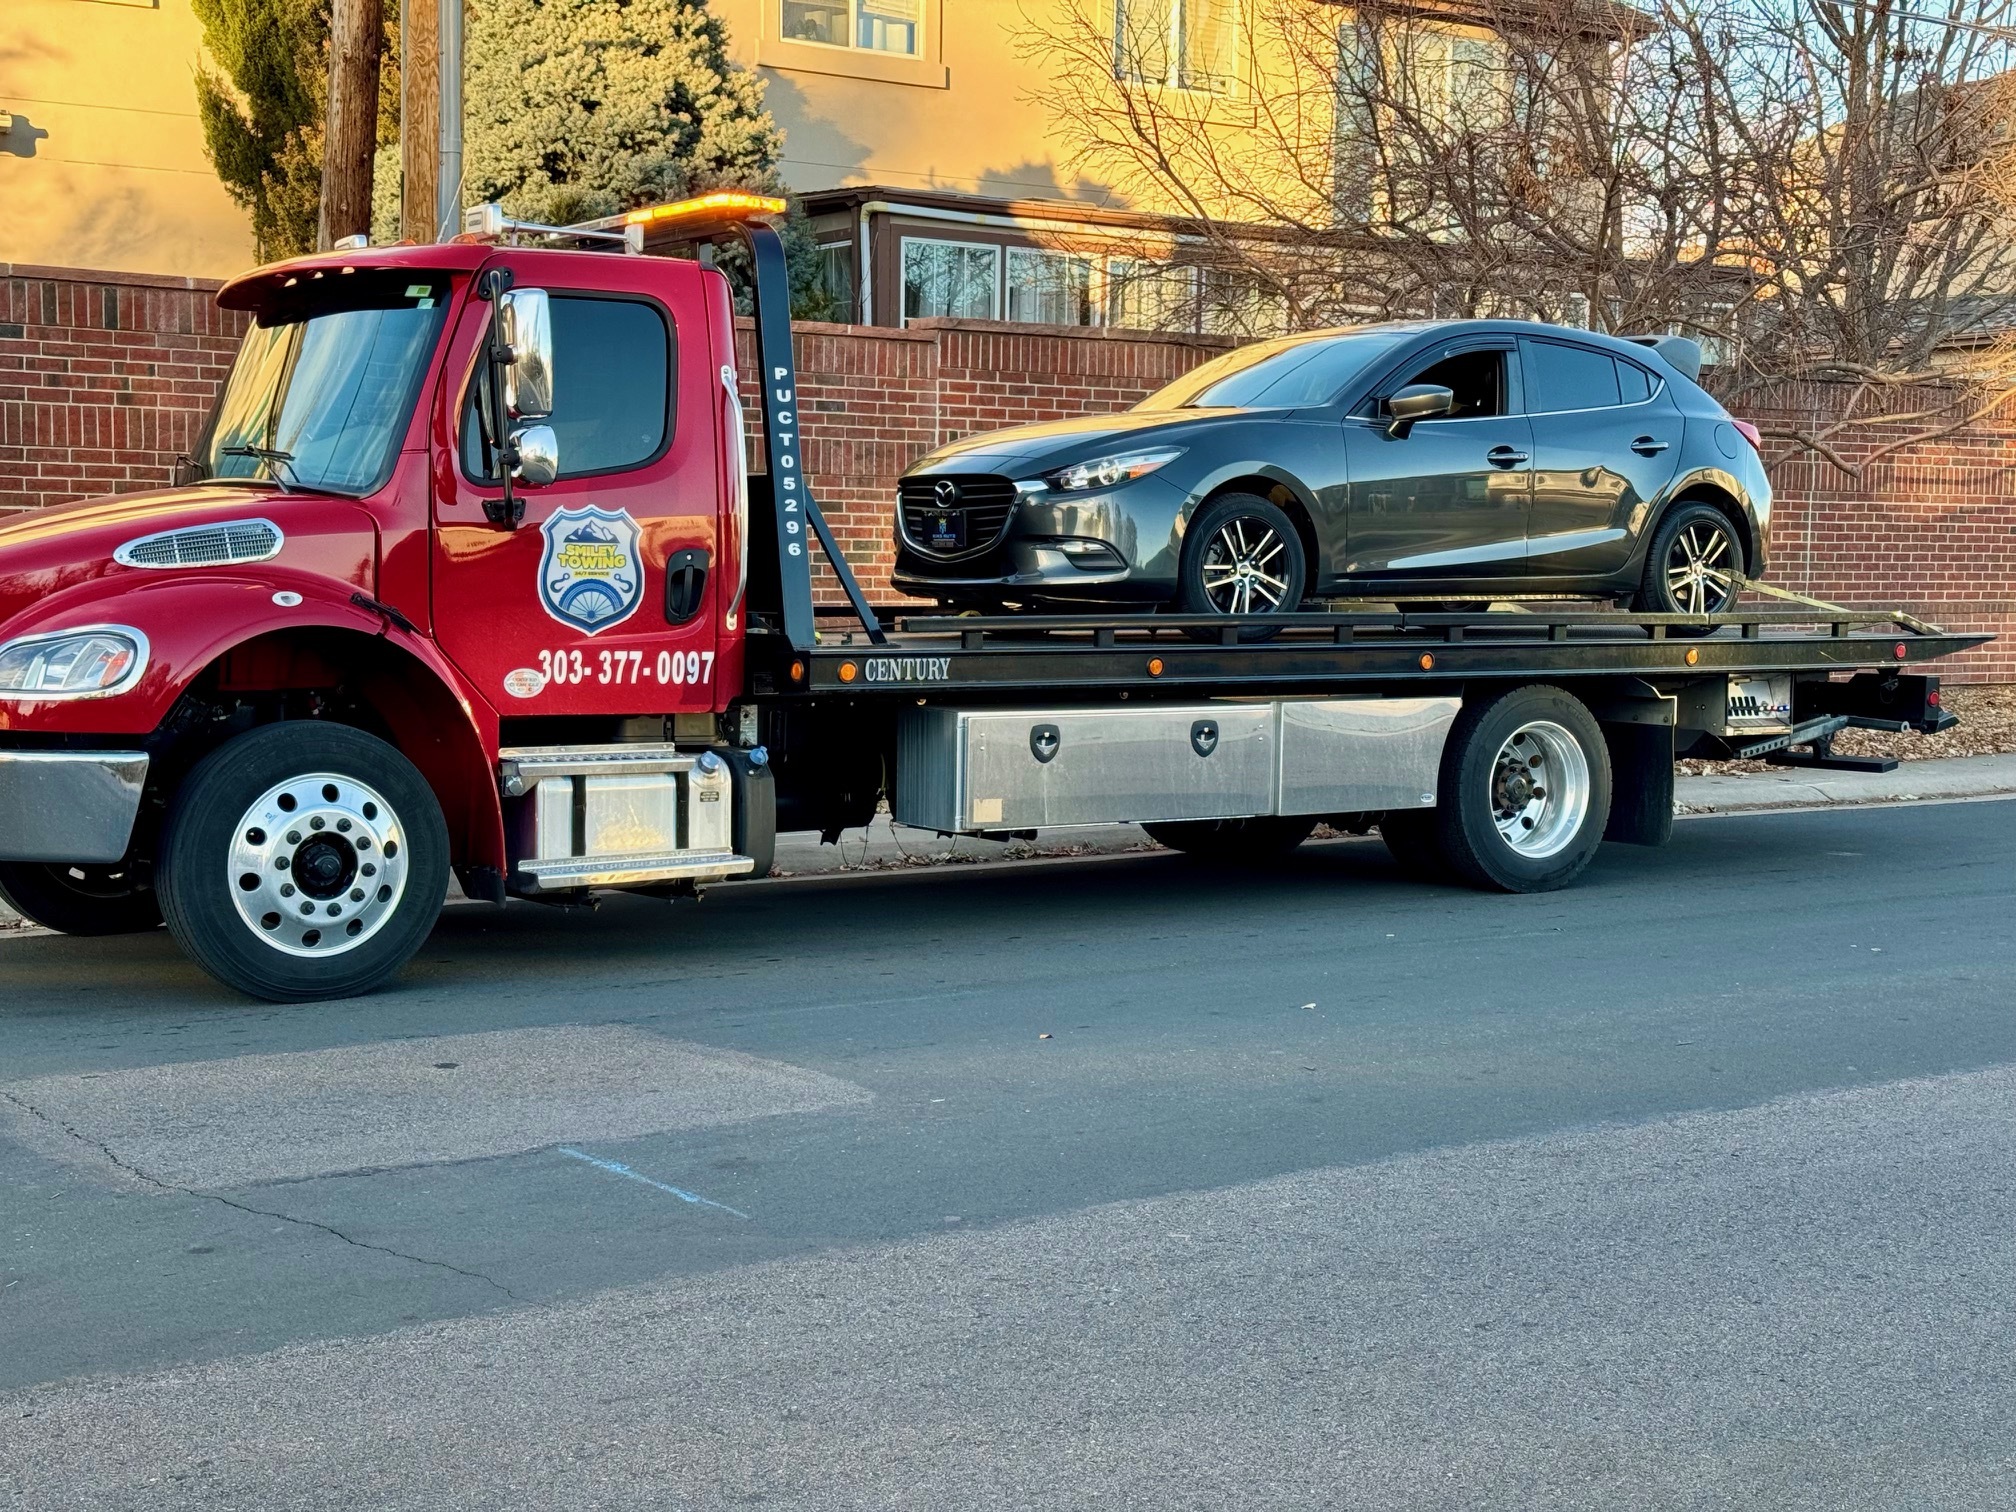 this image shows light-duty towing services in Aurora, CO